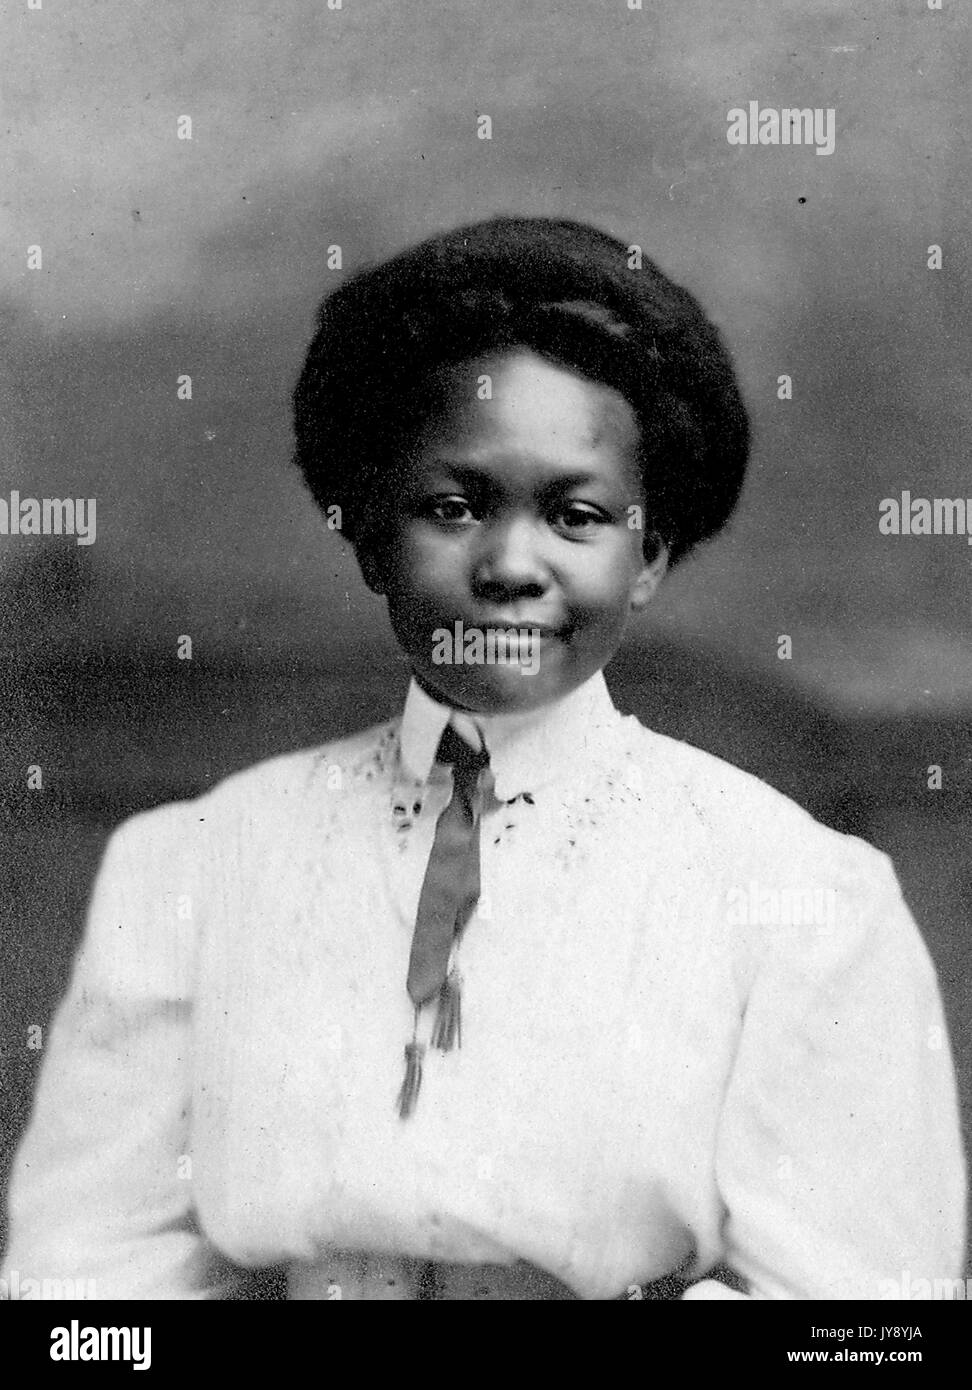 Half length portrait of African American woman wearing white collared top with ribbon tie, short hairdo, neutral facial expression, Lebanon, Missouri, 1915. Stock Photo